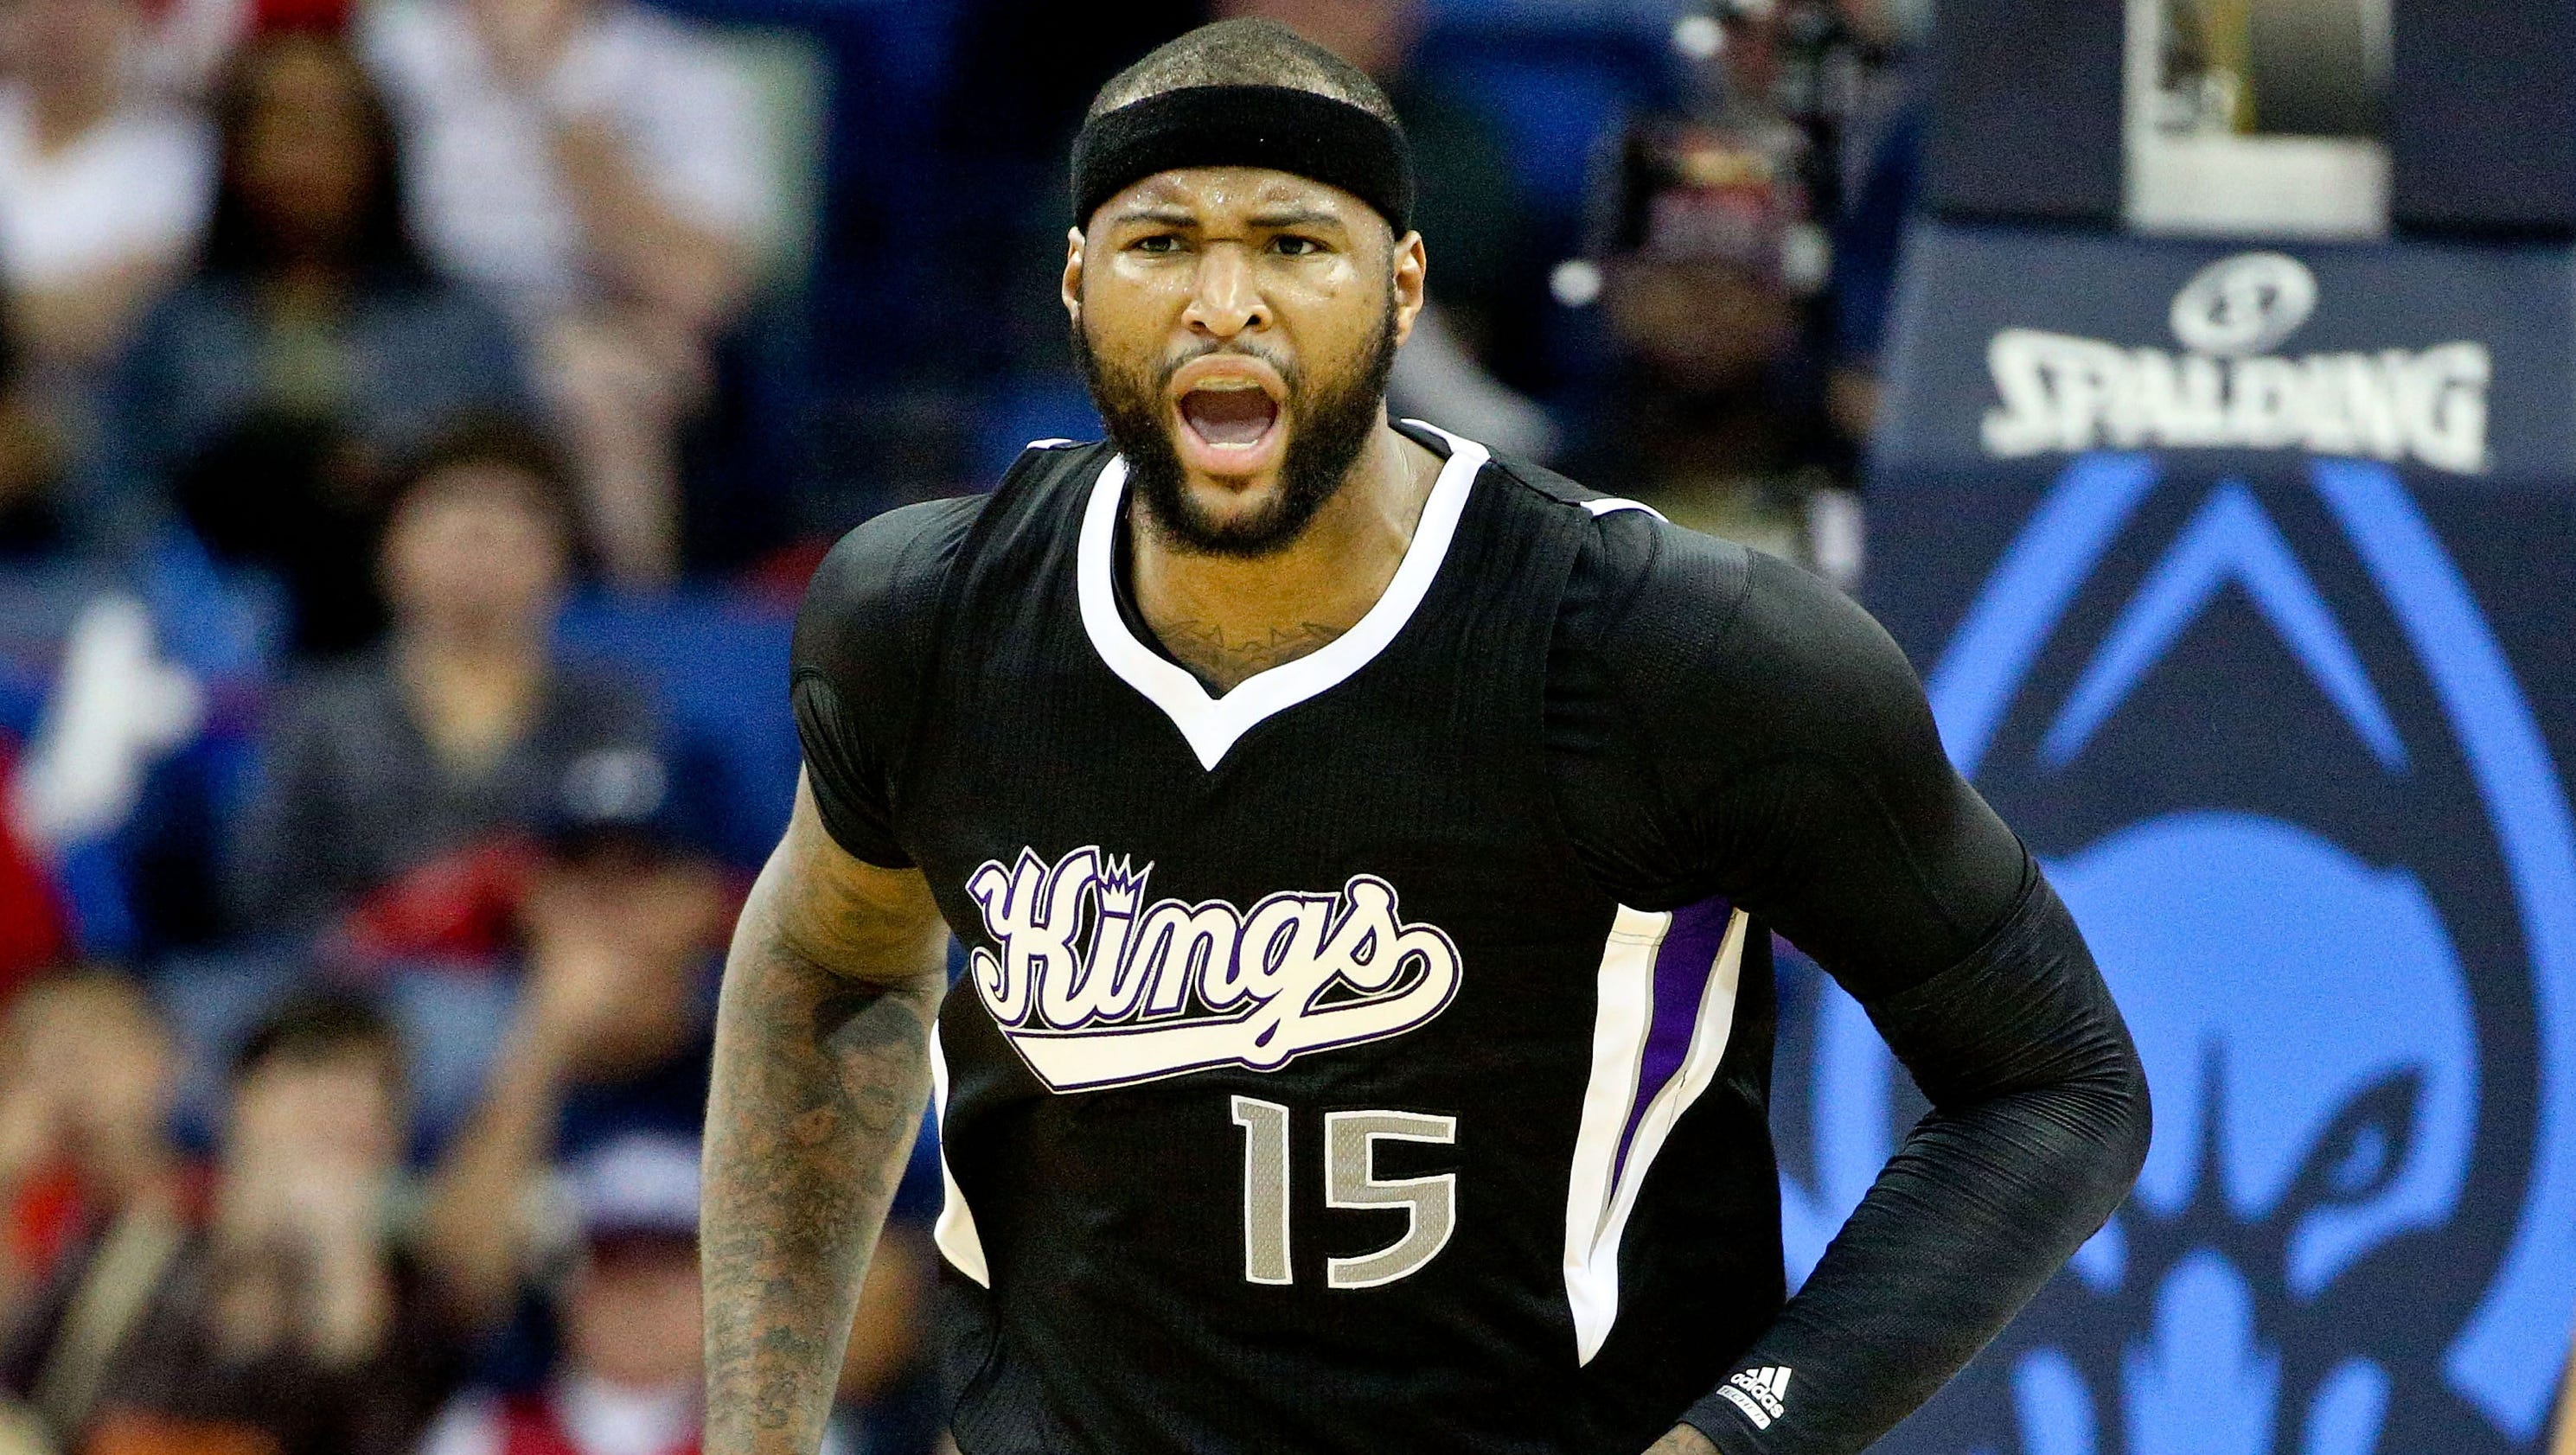 DeMarcus Cousins lashed out at Kings coach George Karl